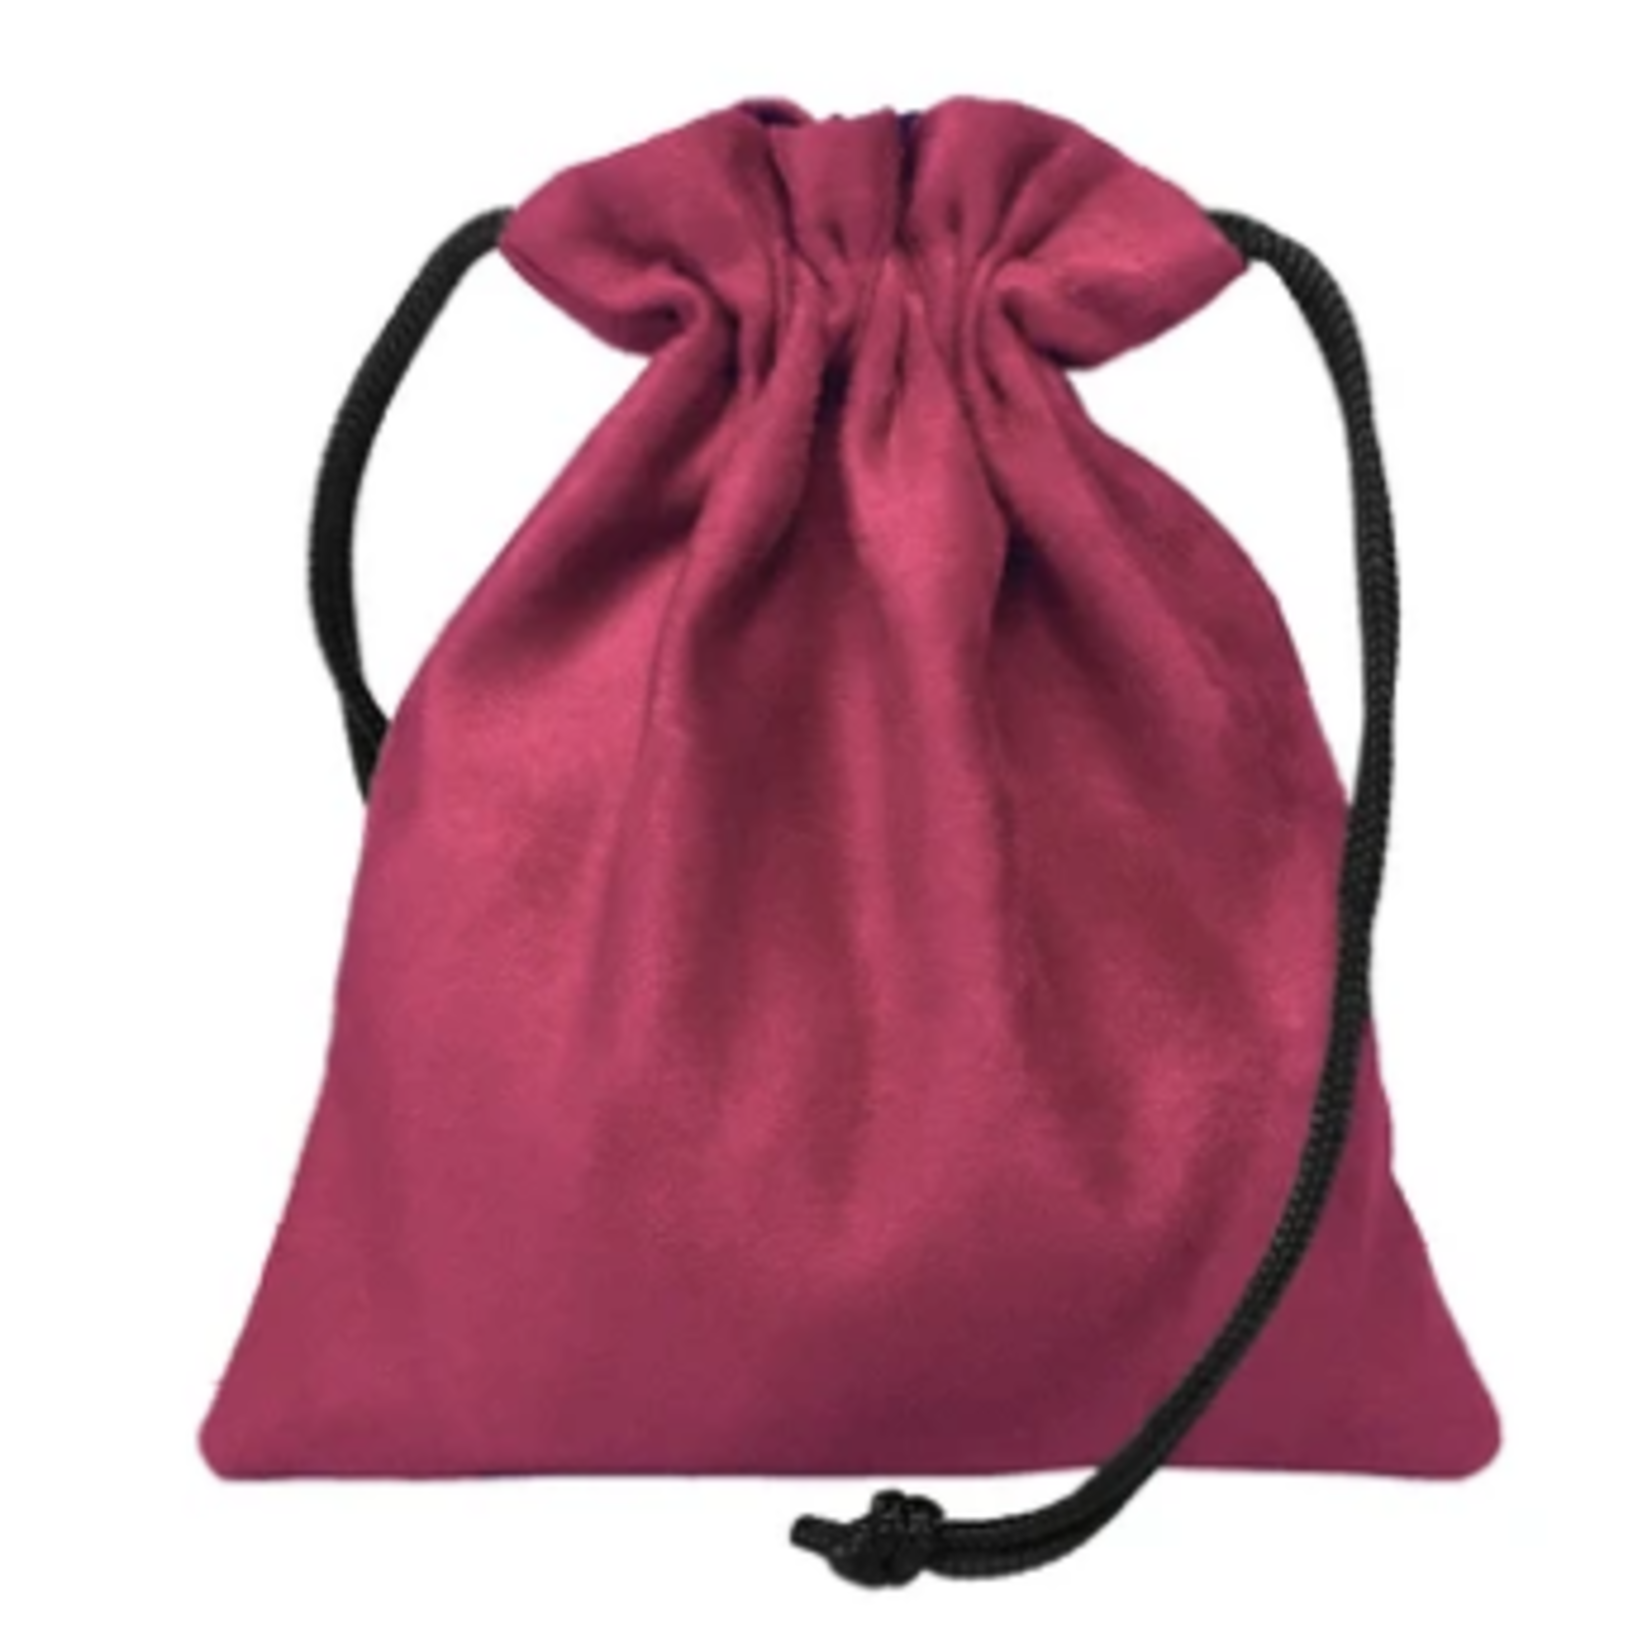 Dice Bag: Classic Dice Pouch - Pink